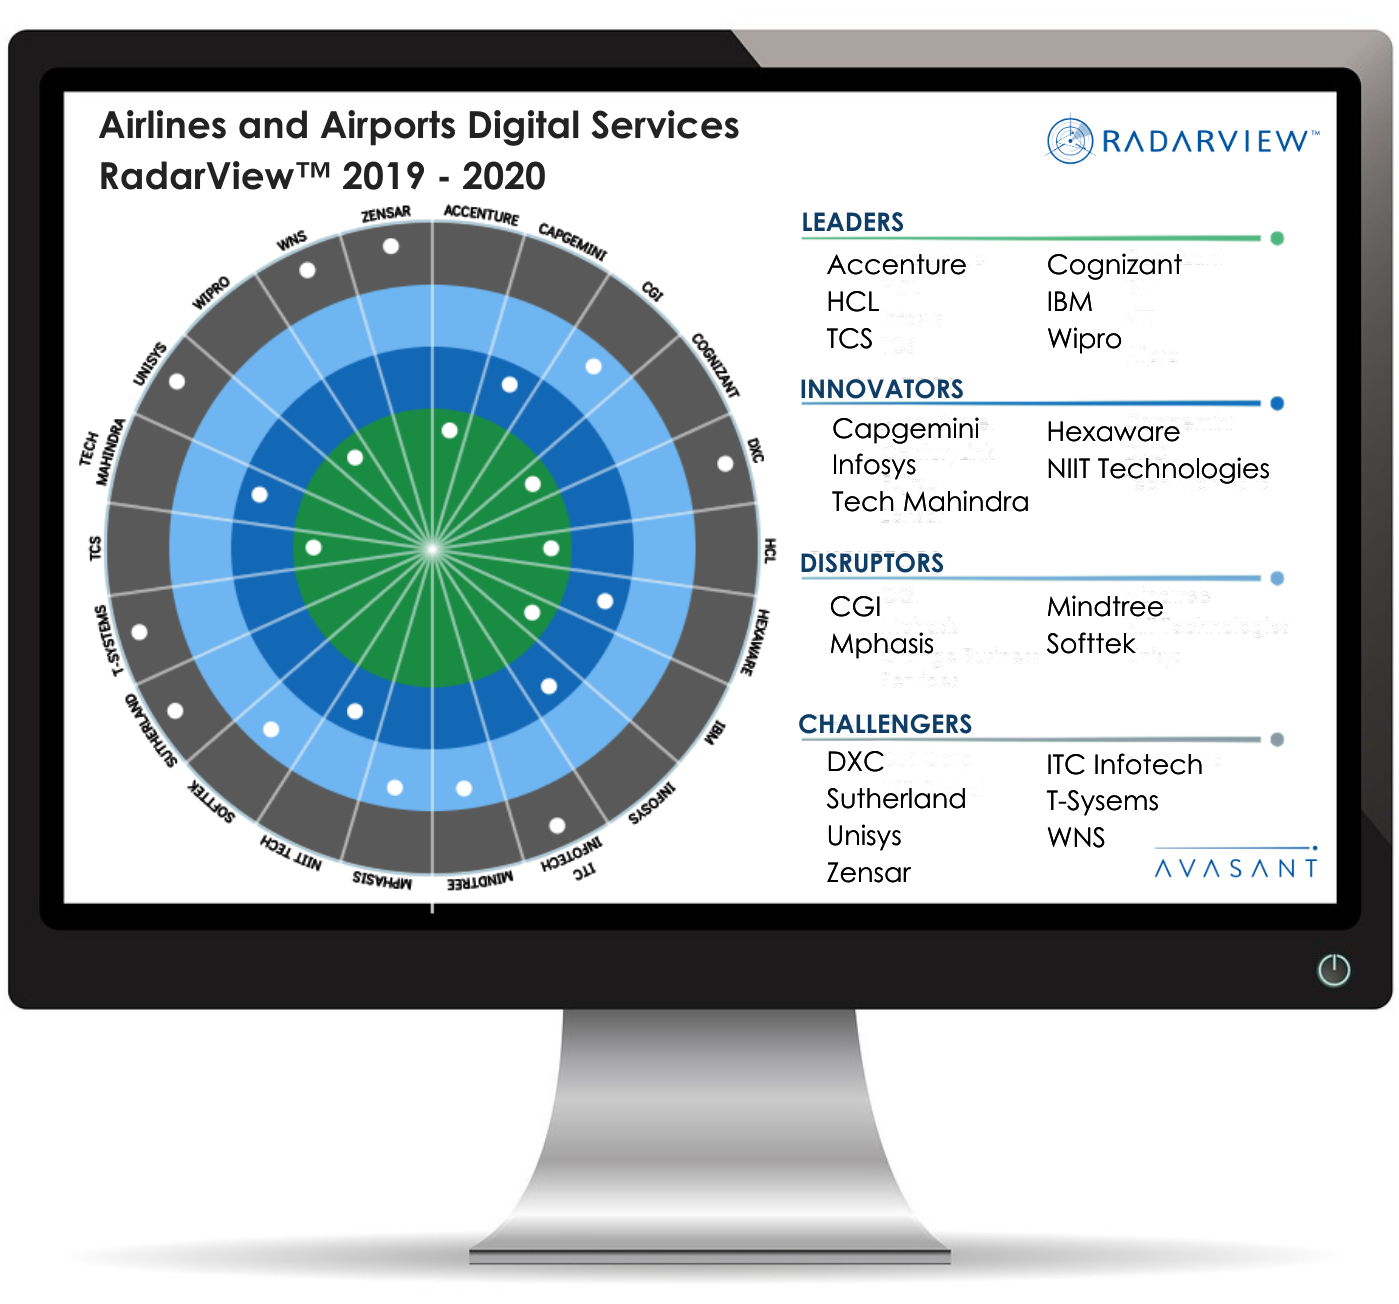 Airlines Airports 2019 2020 RV web graphic - Airlines and Airports Digital Services RadarView™ 2019-2020 - IBM